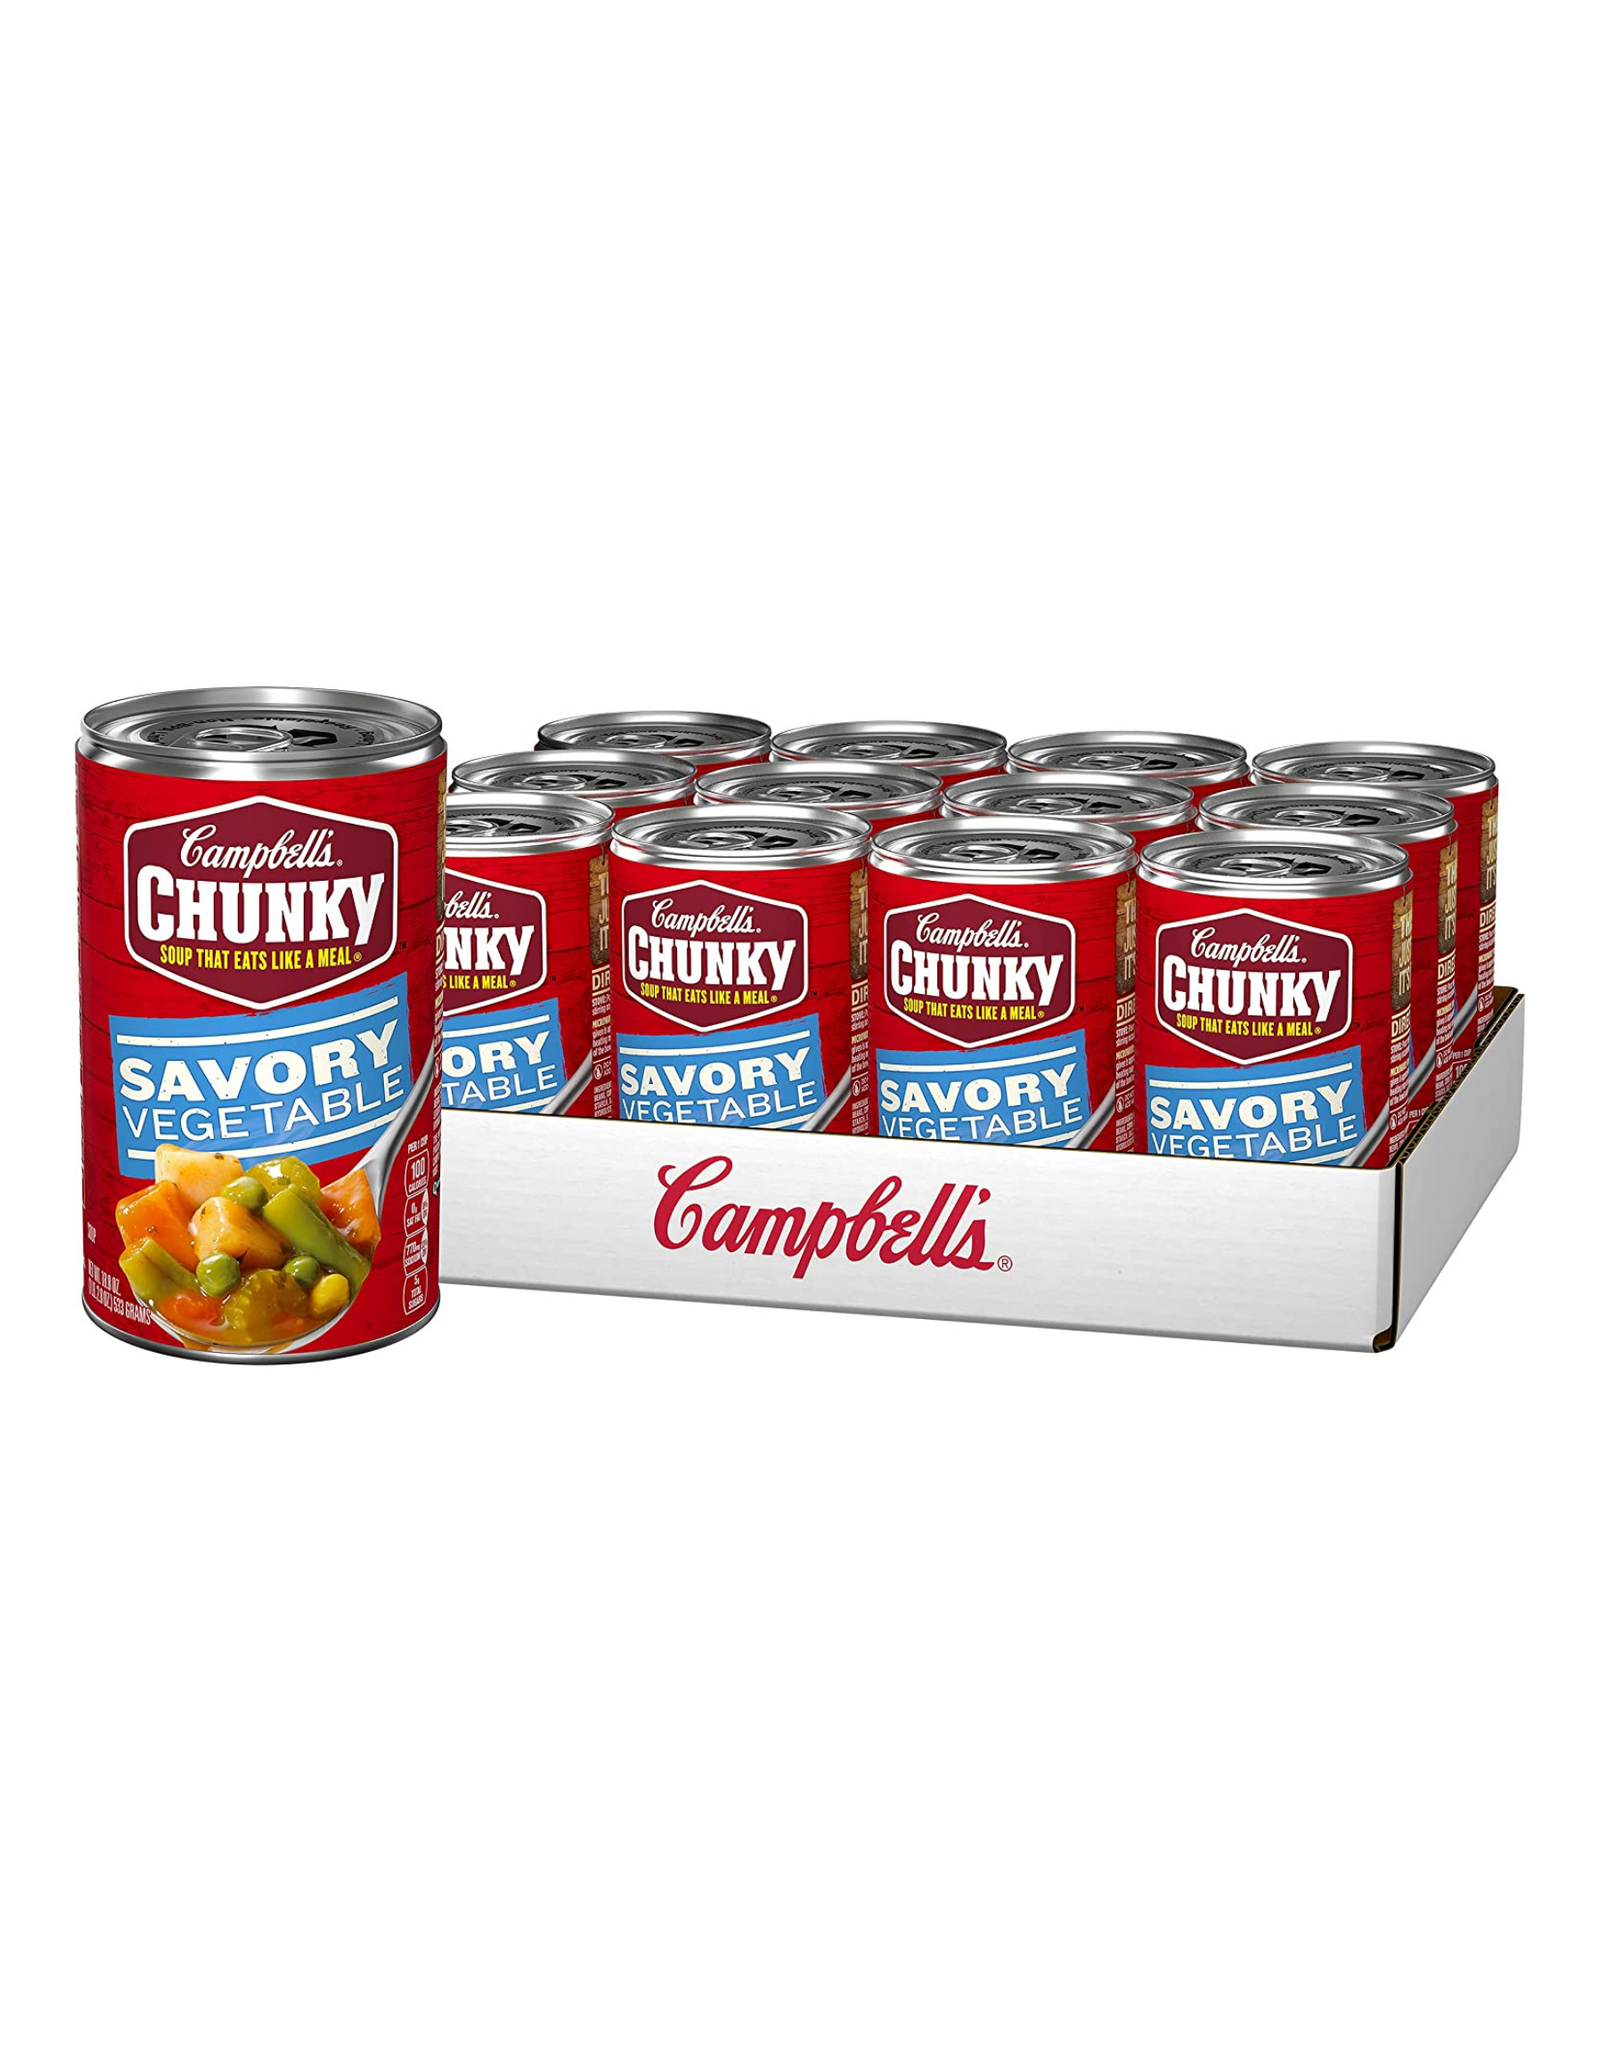 Campbell's Chunky Savory Vegetables Soup, 18.8 oz, 12 Cans